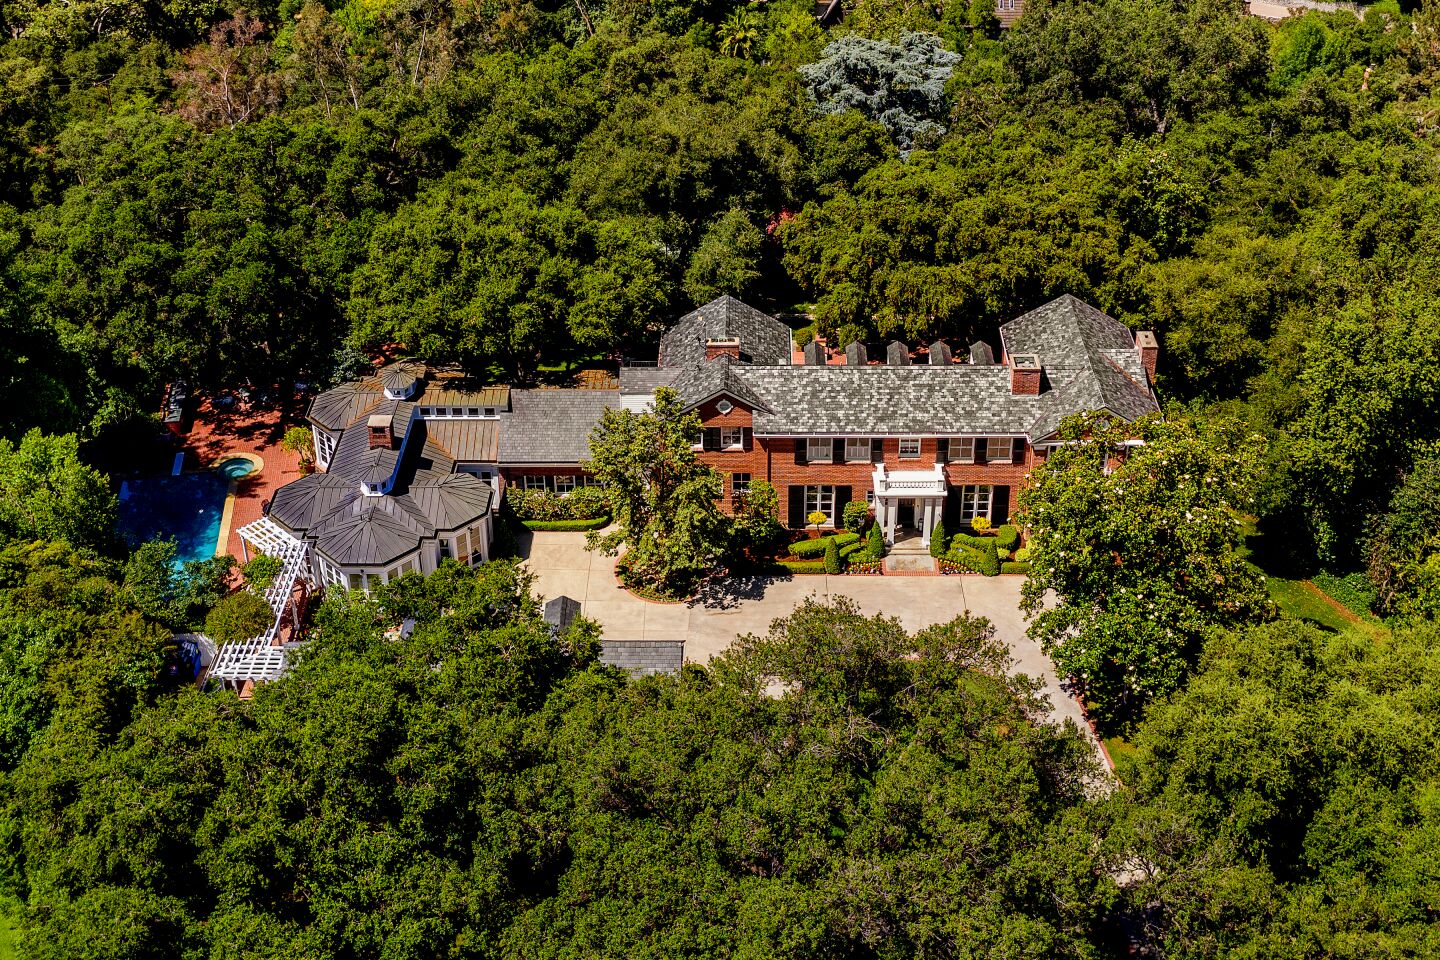 The property, at 535 Meadow Grove St., La Cañada Flintridge, is priced at $7.895 million.